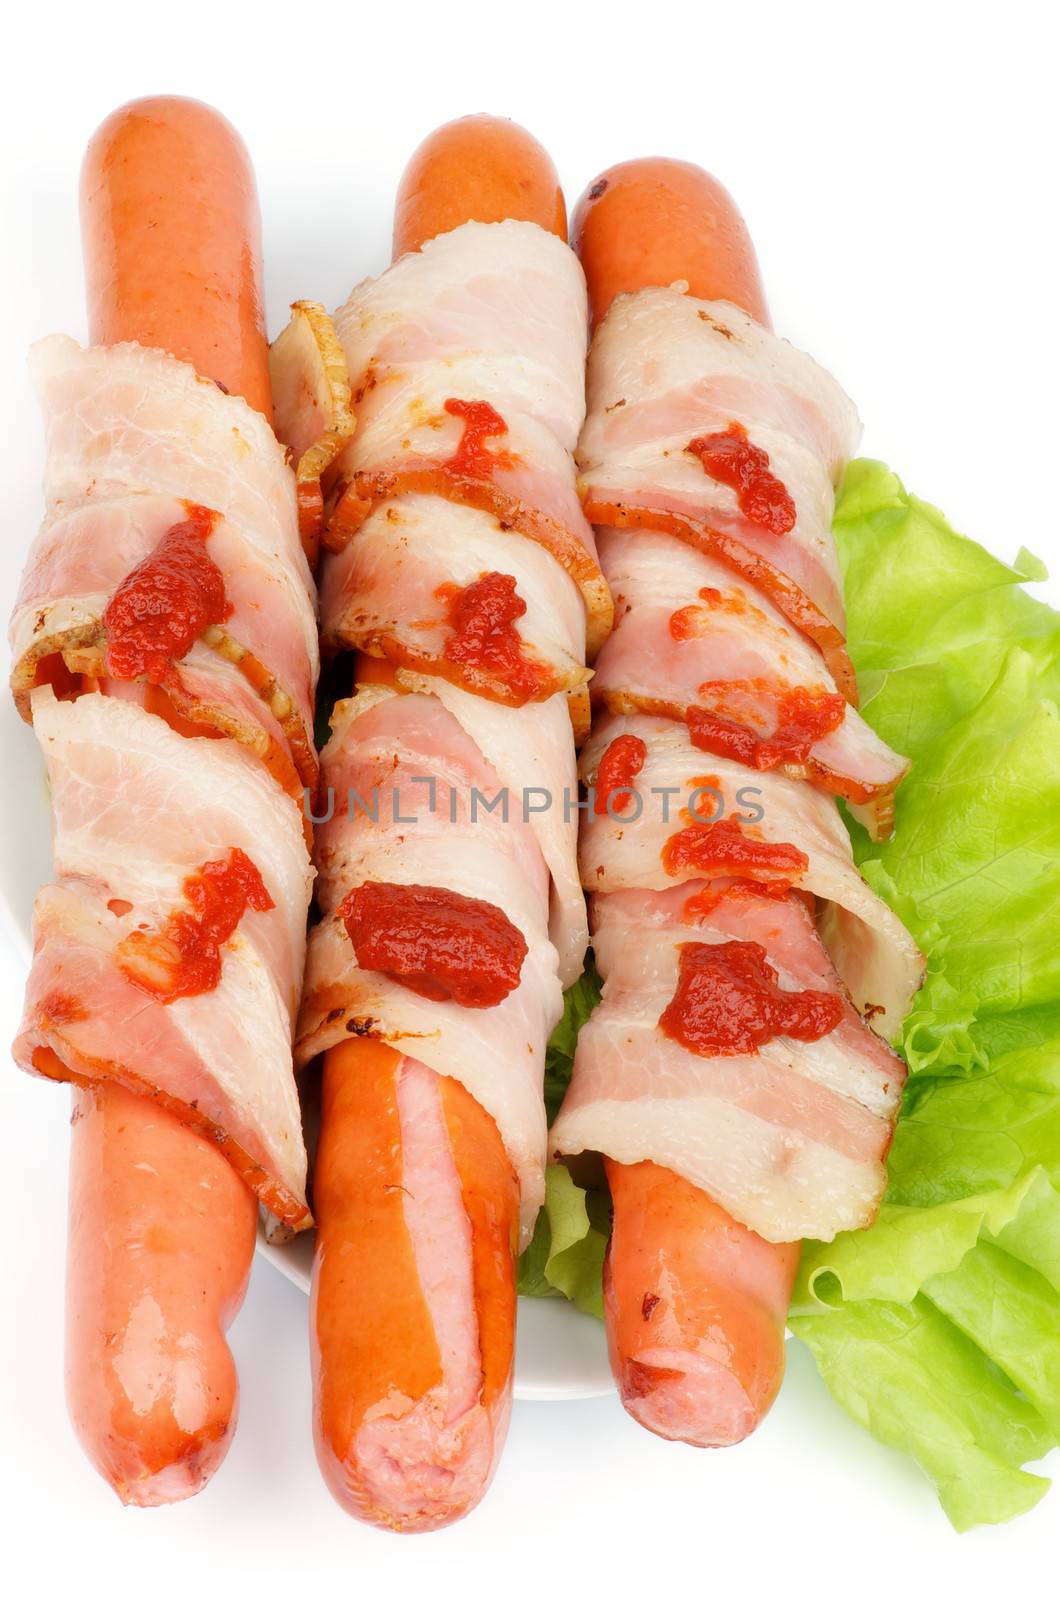 Three Pork Sausages Wrapped in Bacon Garnished with Lettuce and Ketchup isolated on white background